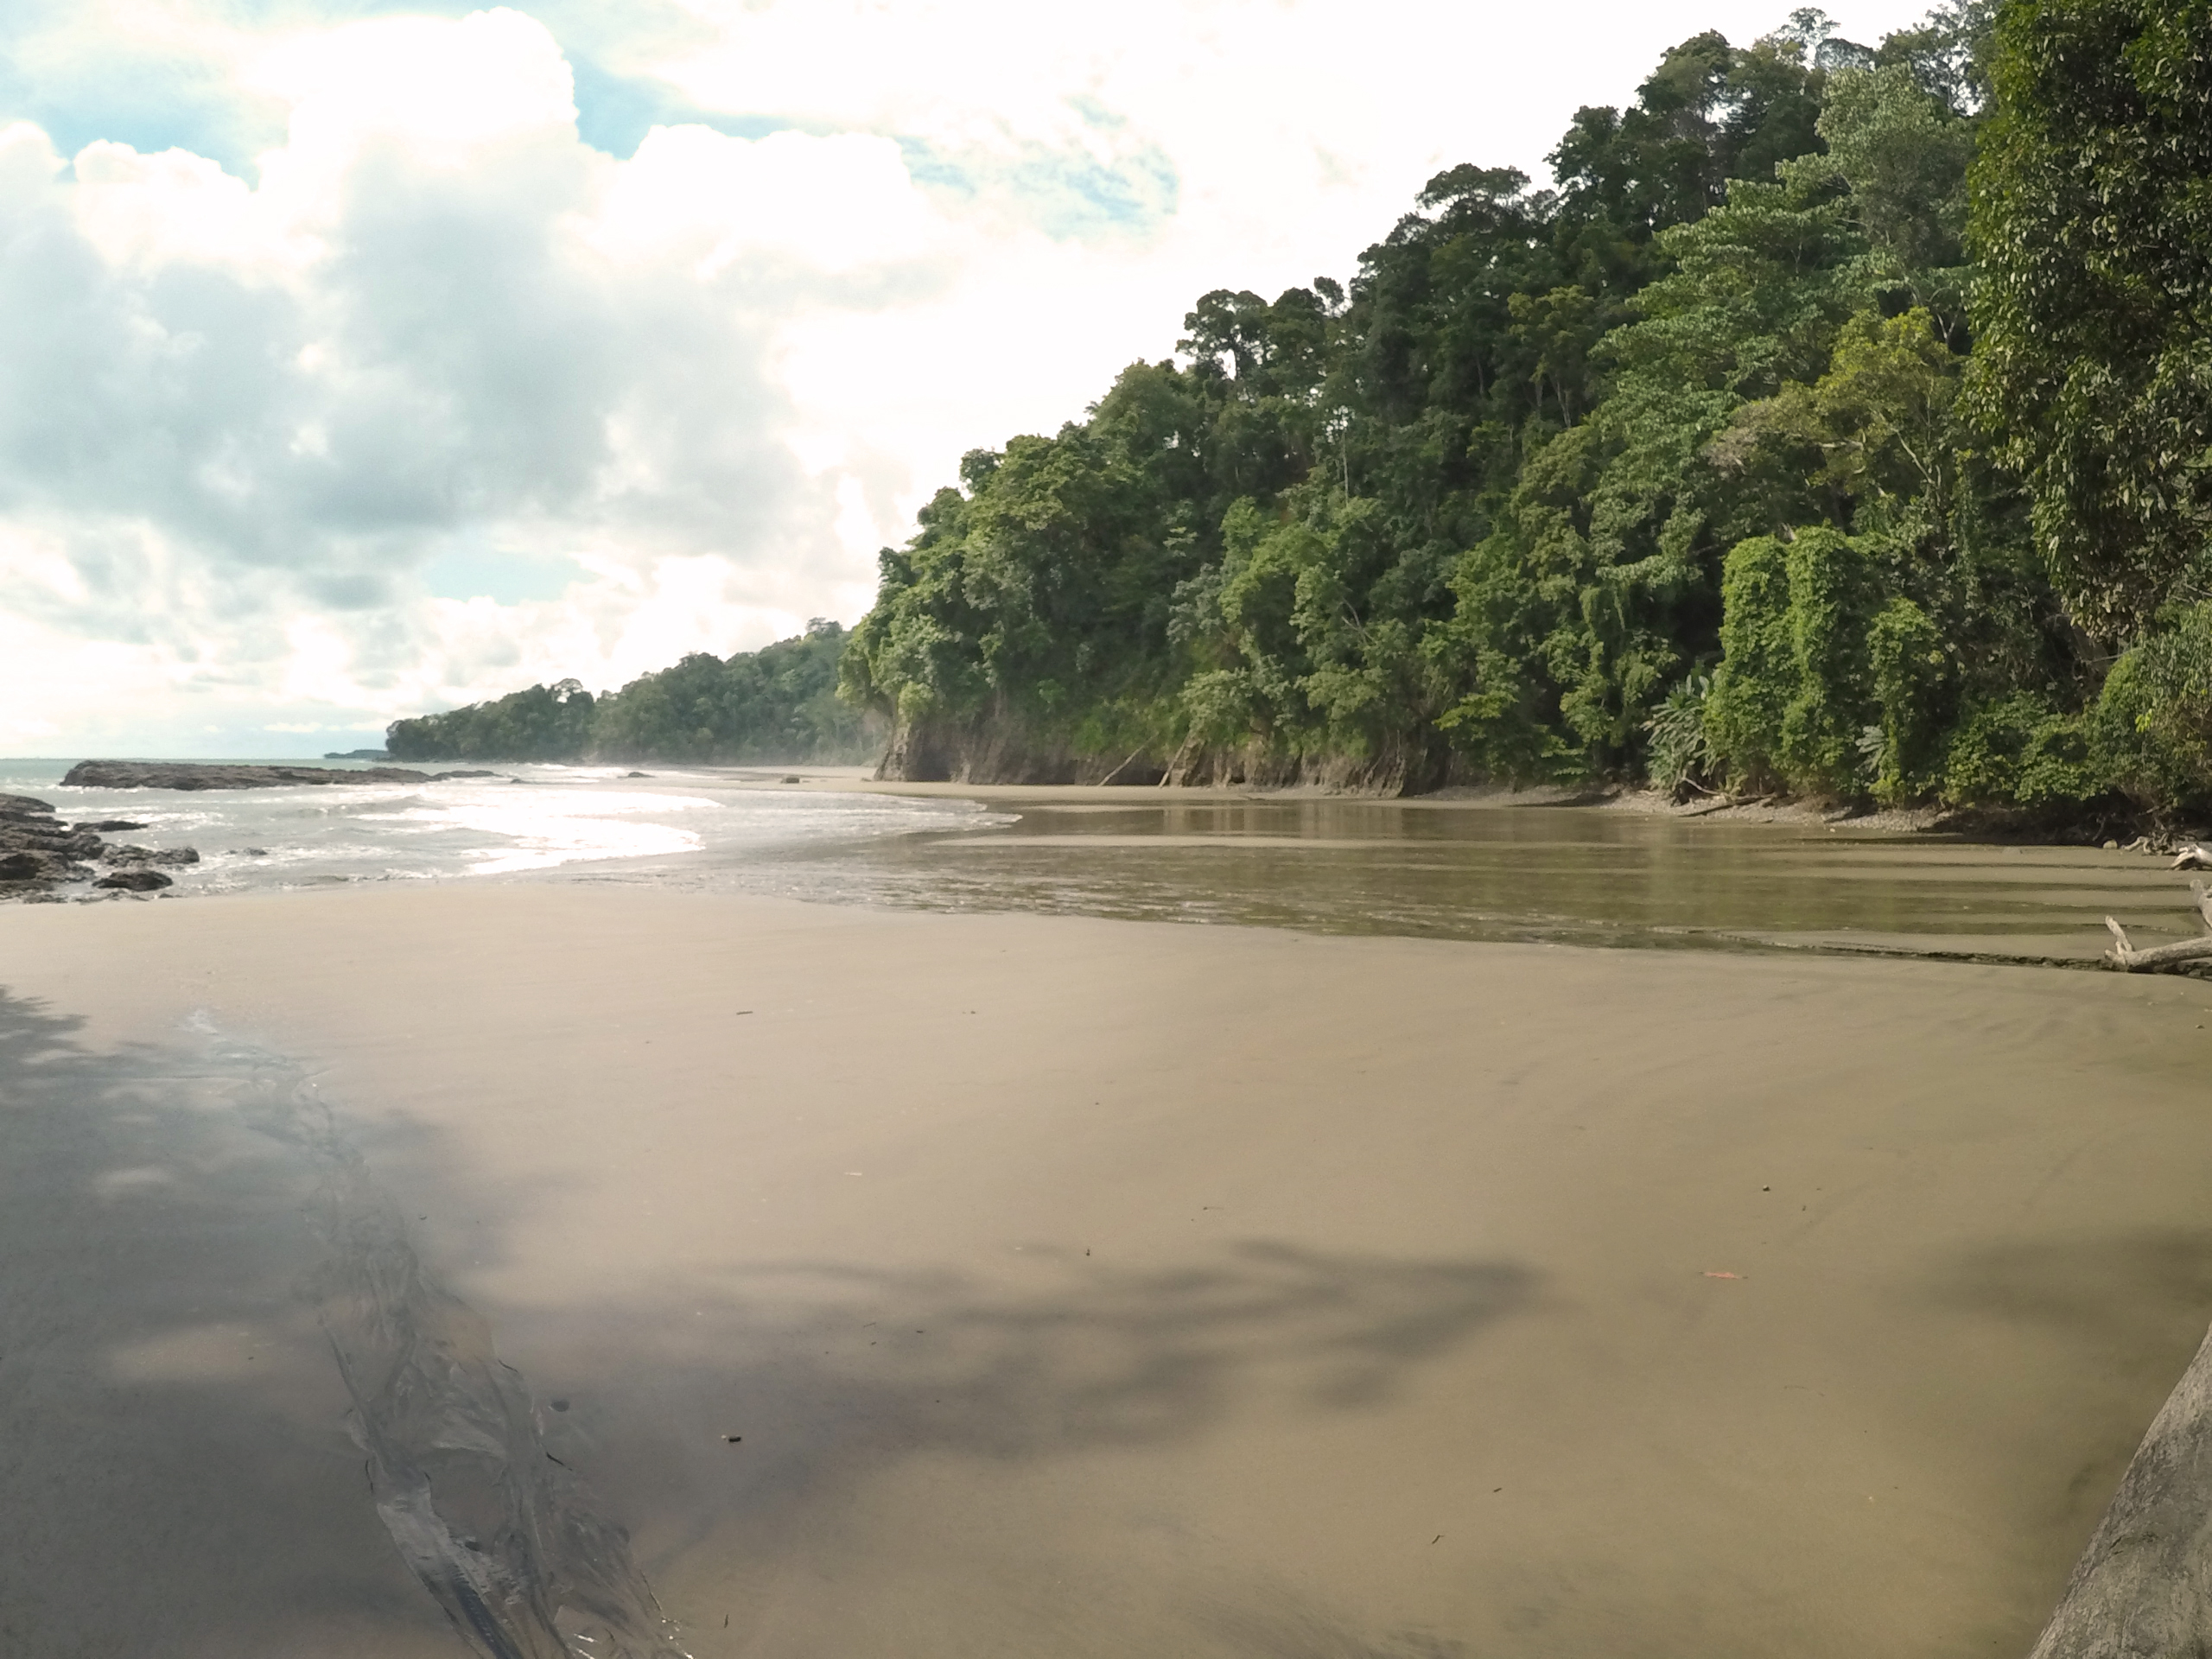 Playa Arcos in Ballena Marine National Park, Costa Rica as seen on Travel Channel's Top Secret Beaches episode TTSB101H.